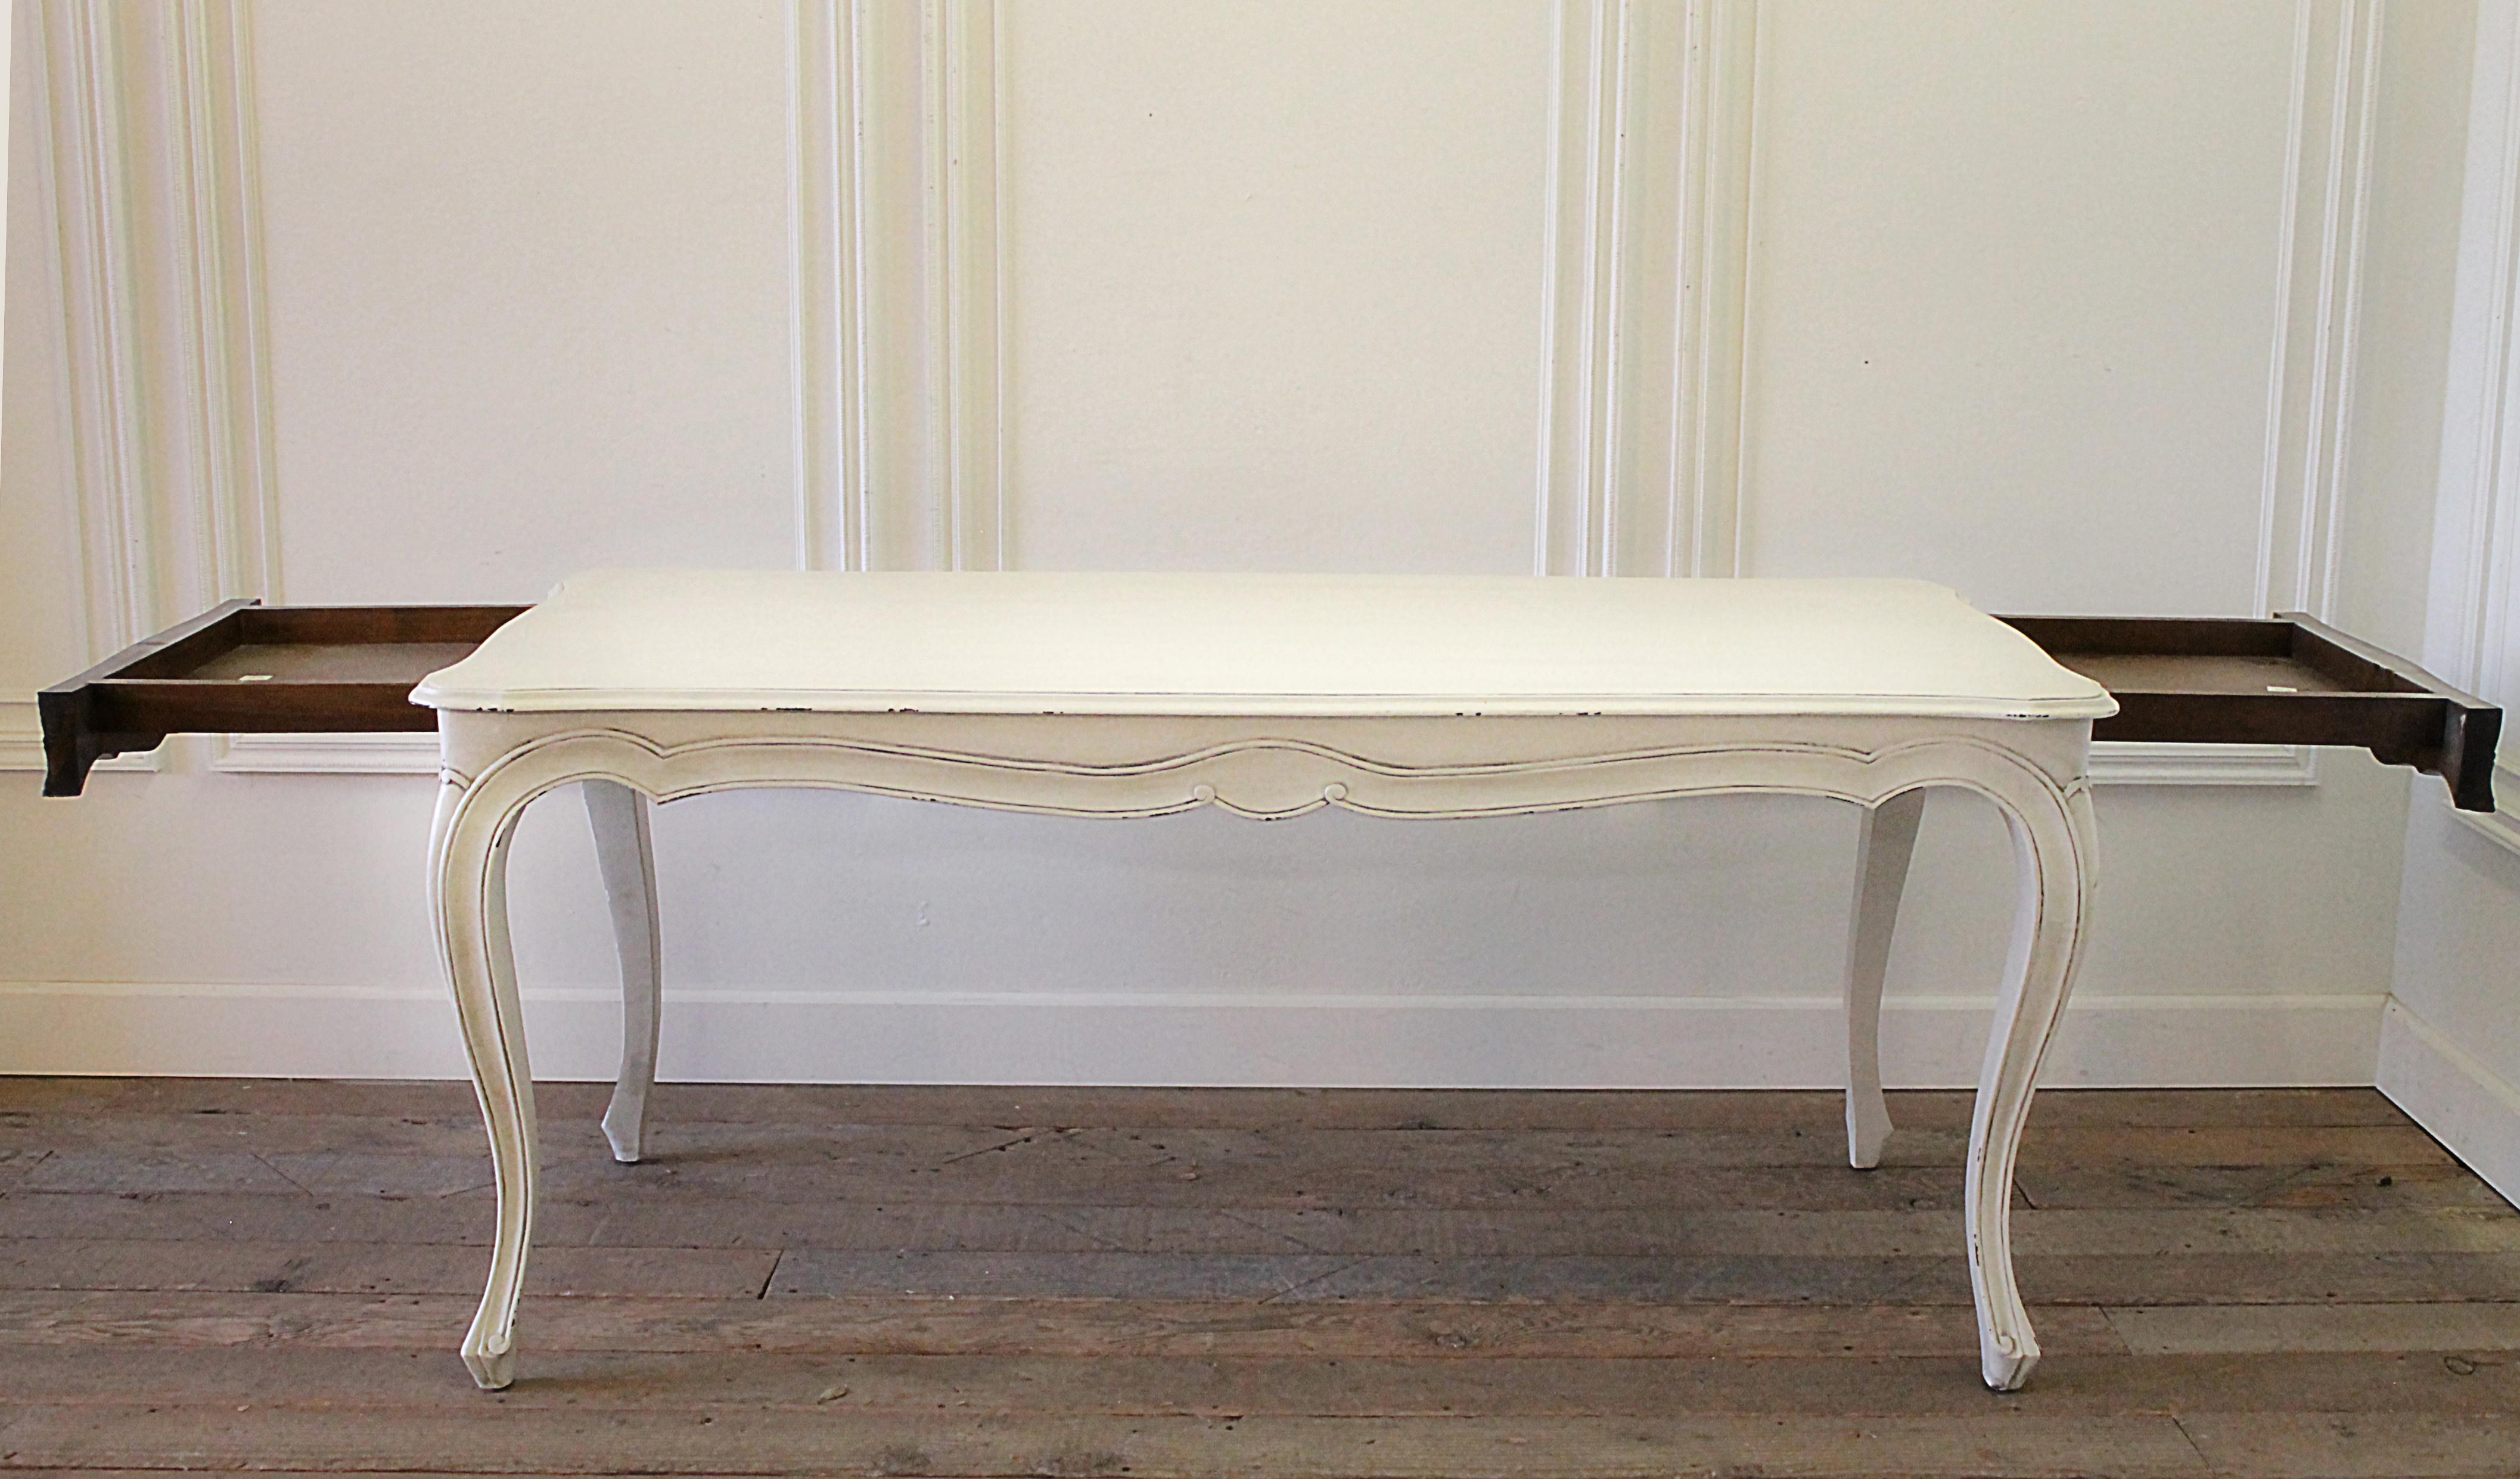 European 20th Century Painted Louis XV Style Country French Dining Table with Drawers